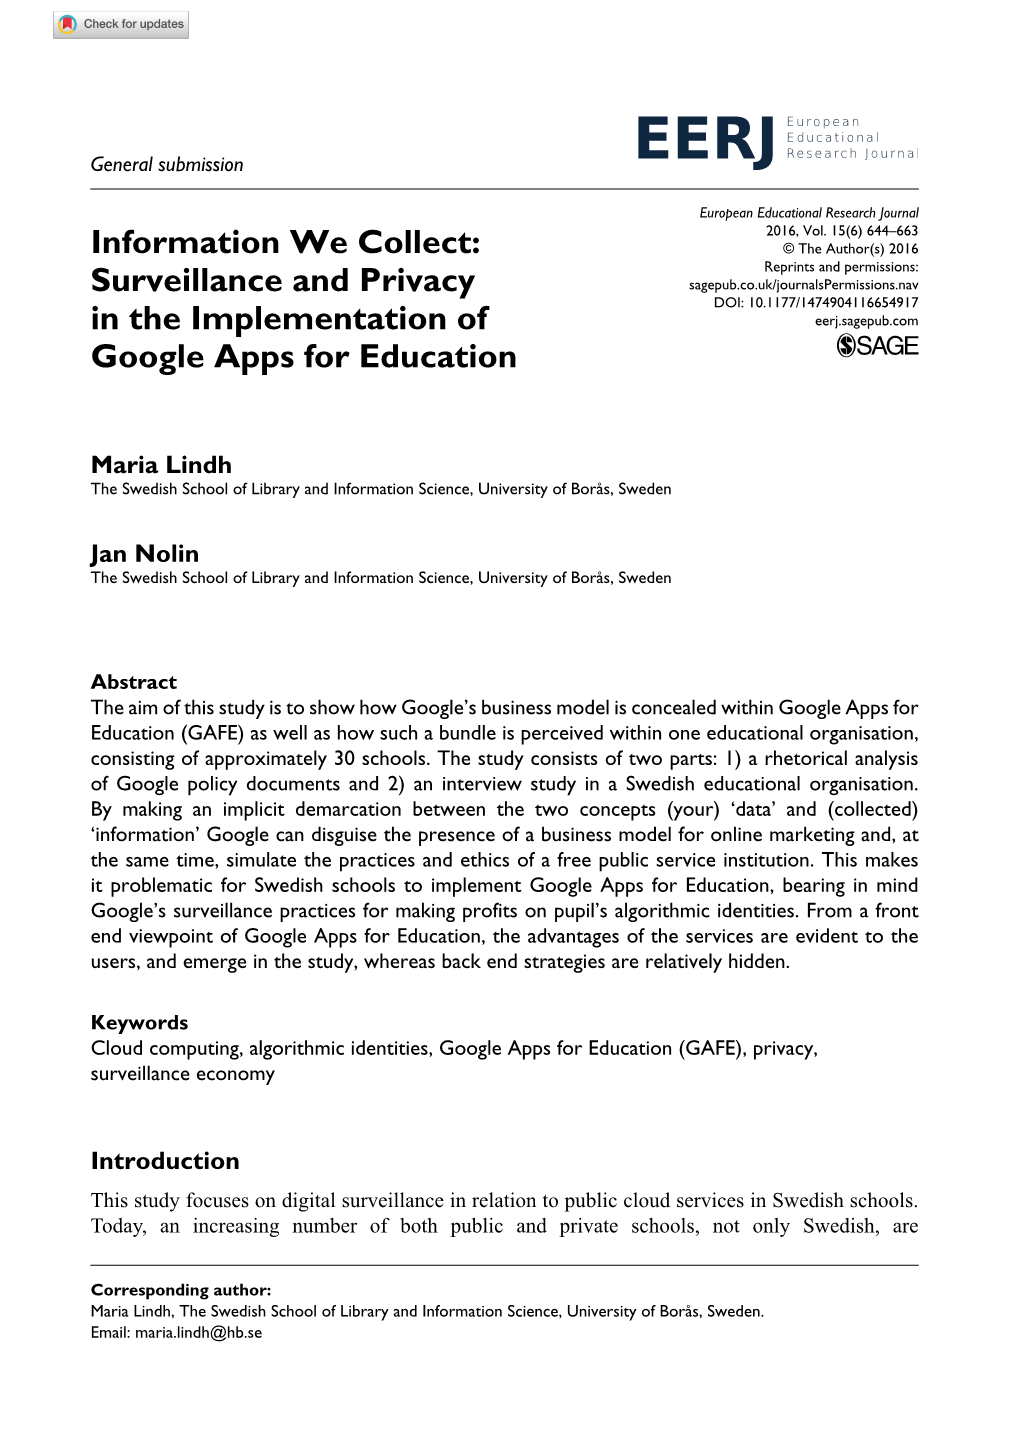 Surveillance and Privacy in the Implementation of Google Apps For